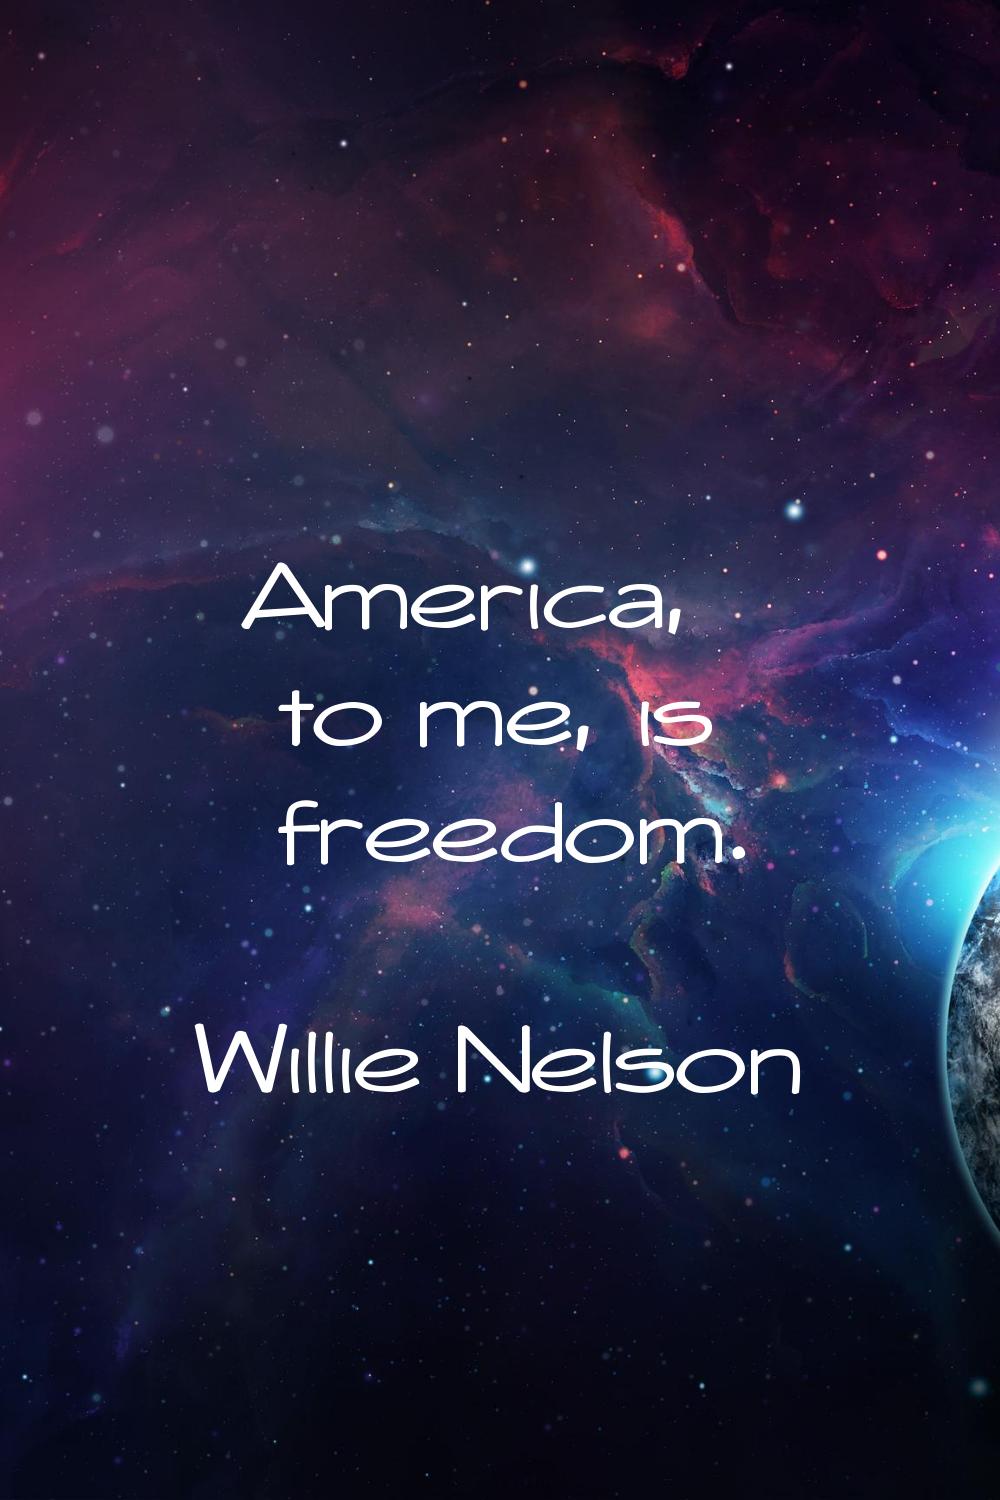 America, to me, is freedom.